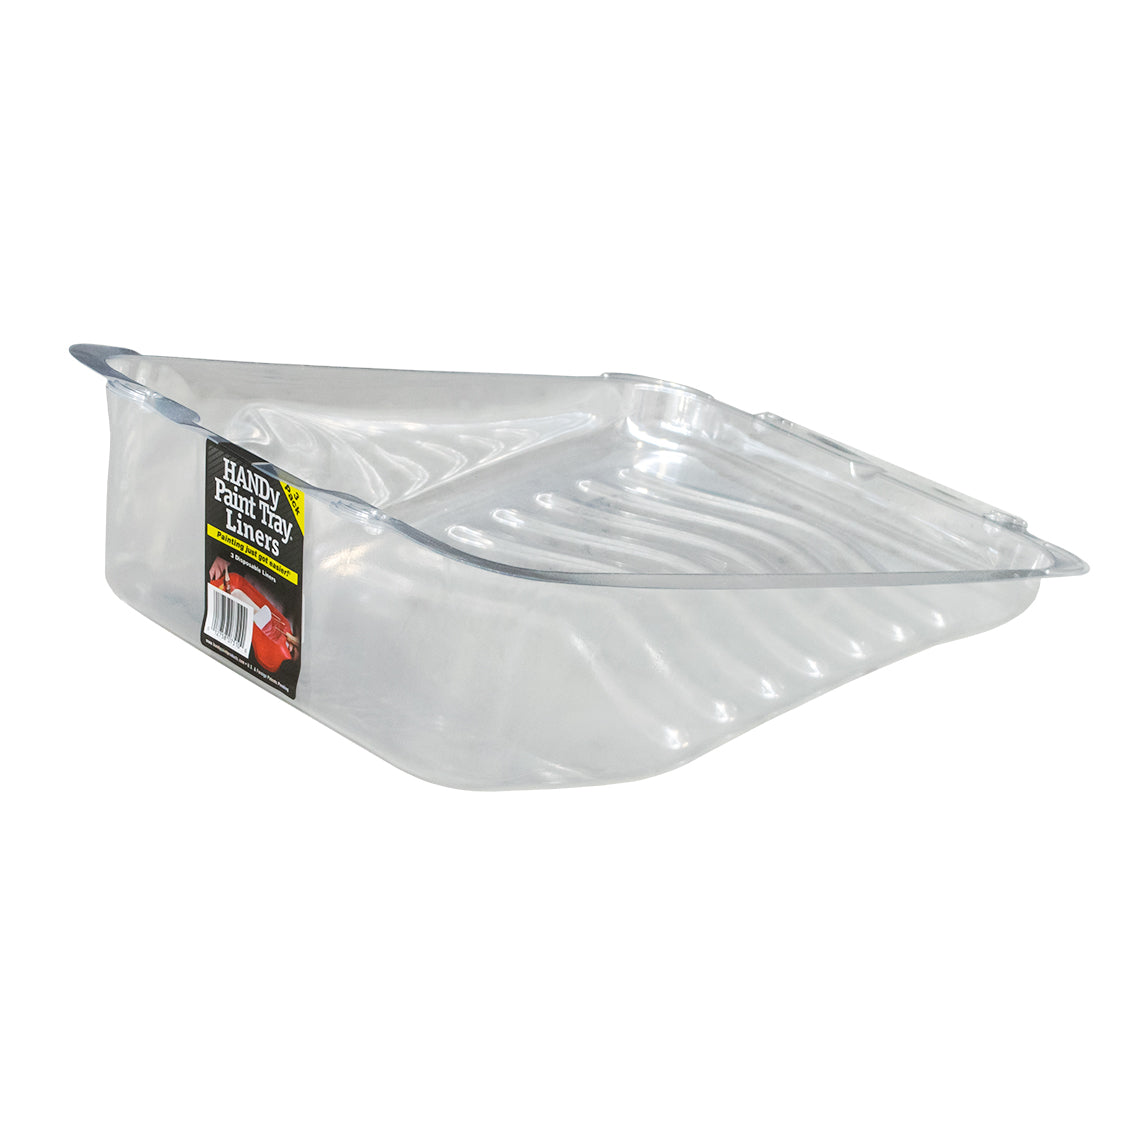 Handy Paint Tray Liners - 3Pack